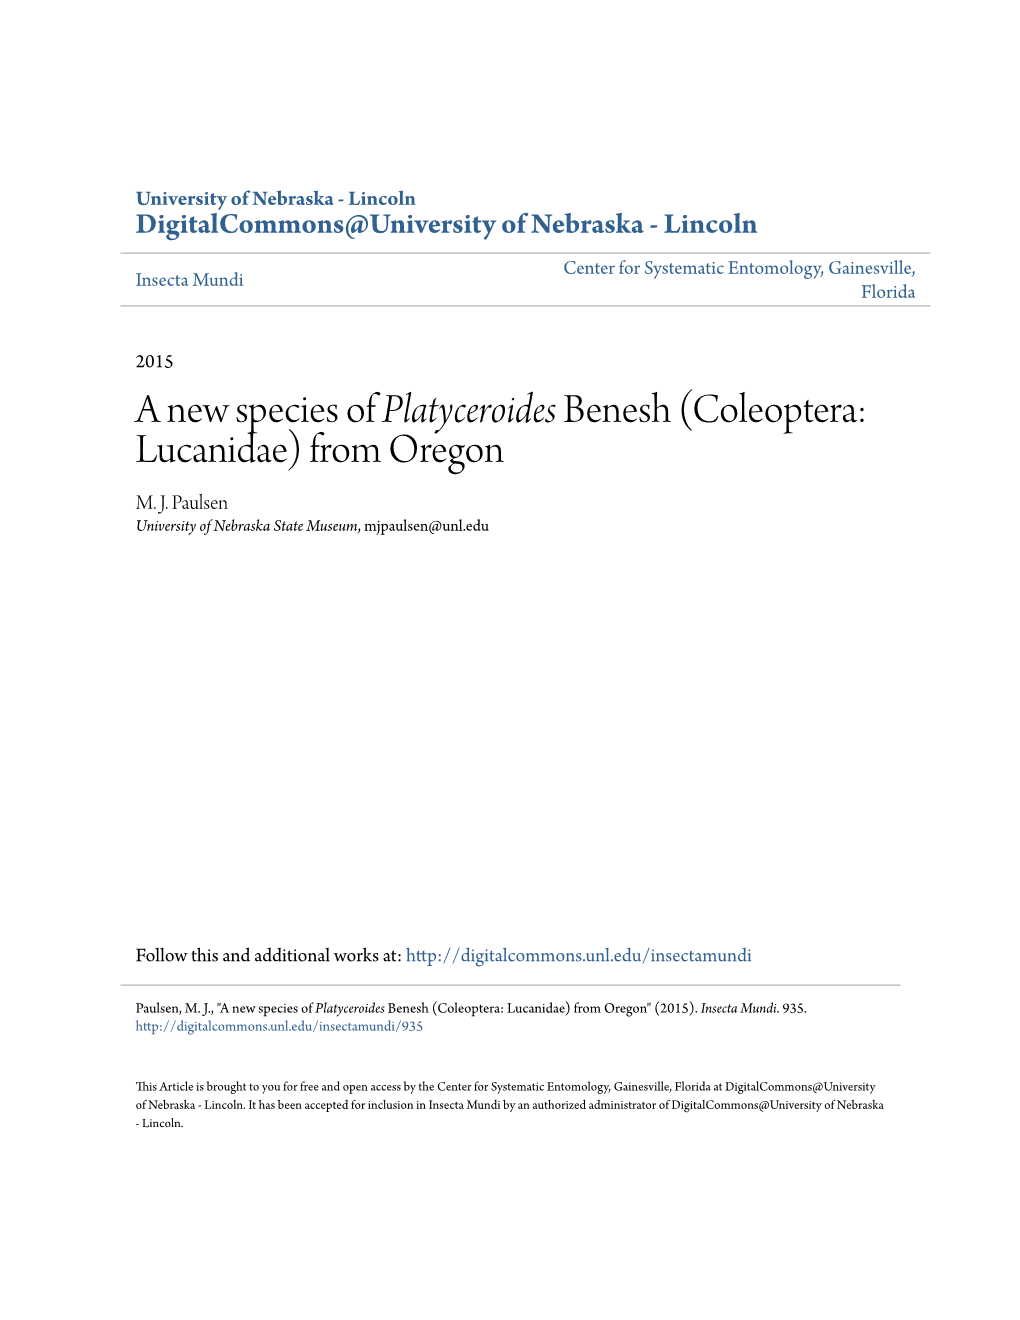 A New Species of Platyceroides Benesh (Coleoptera: Lucanidae) from Oregon M